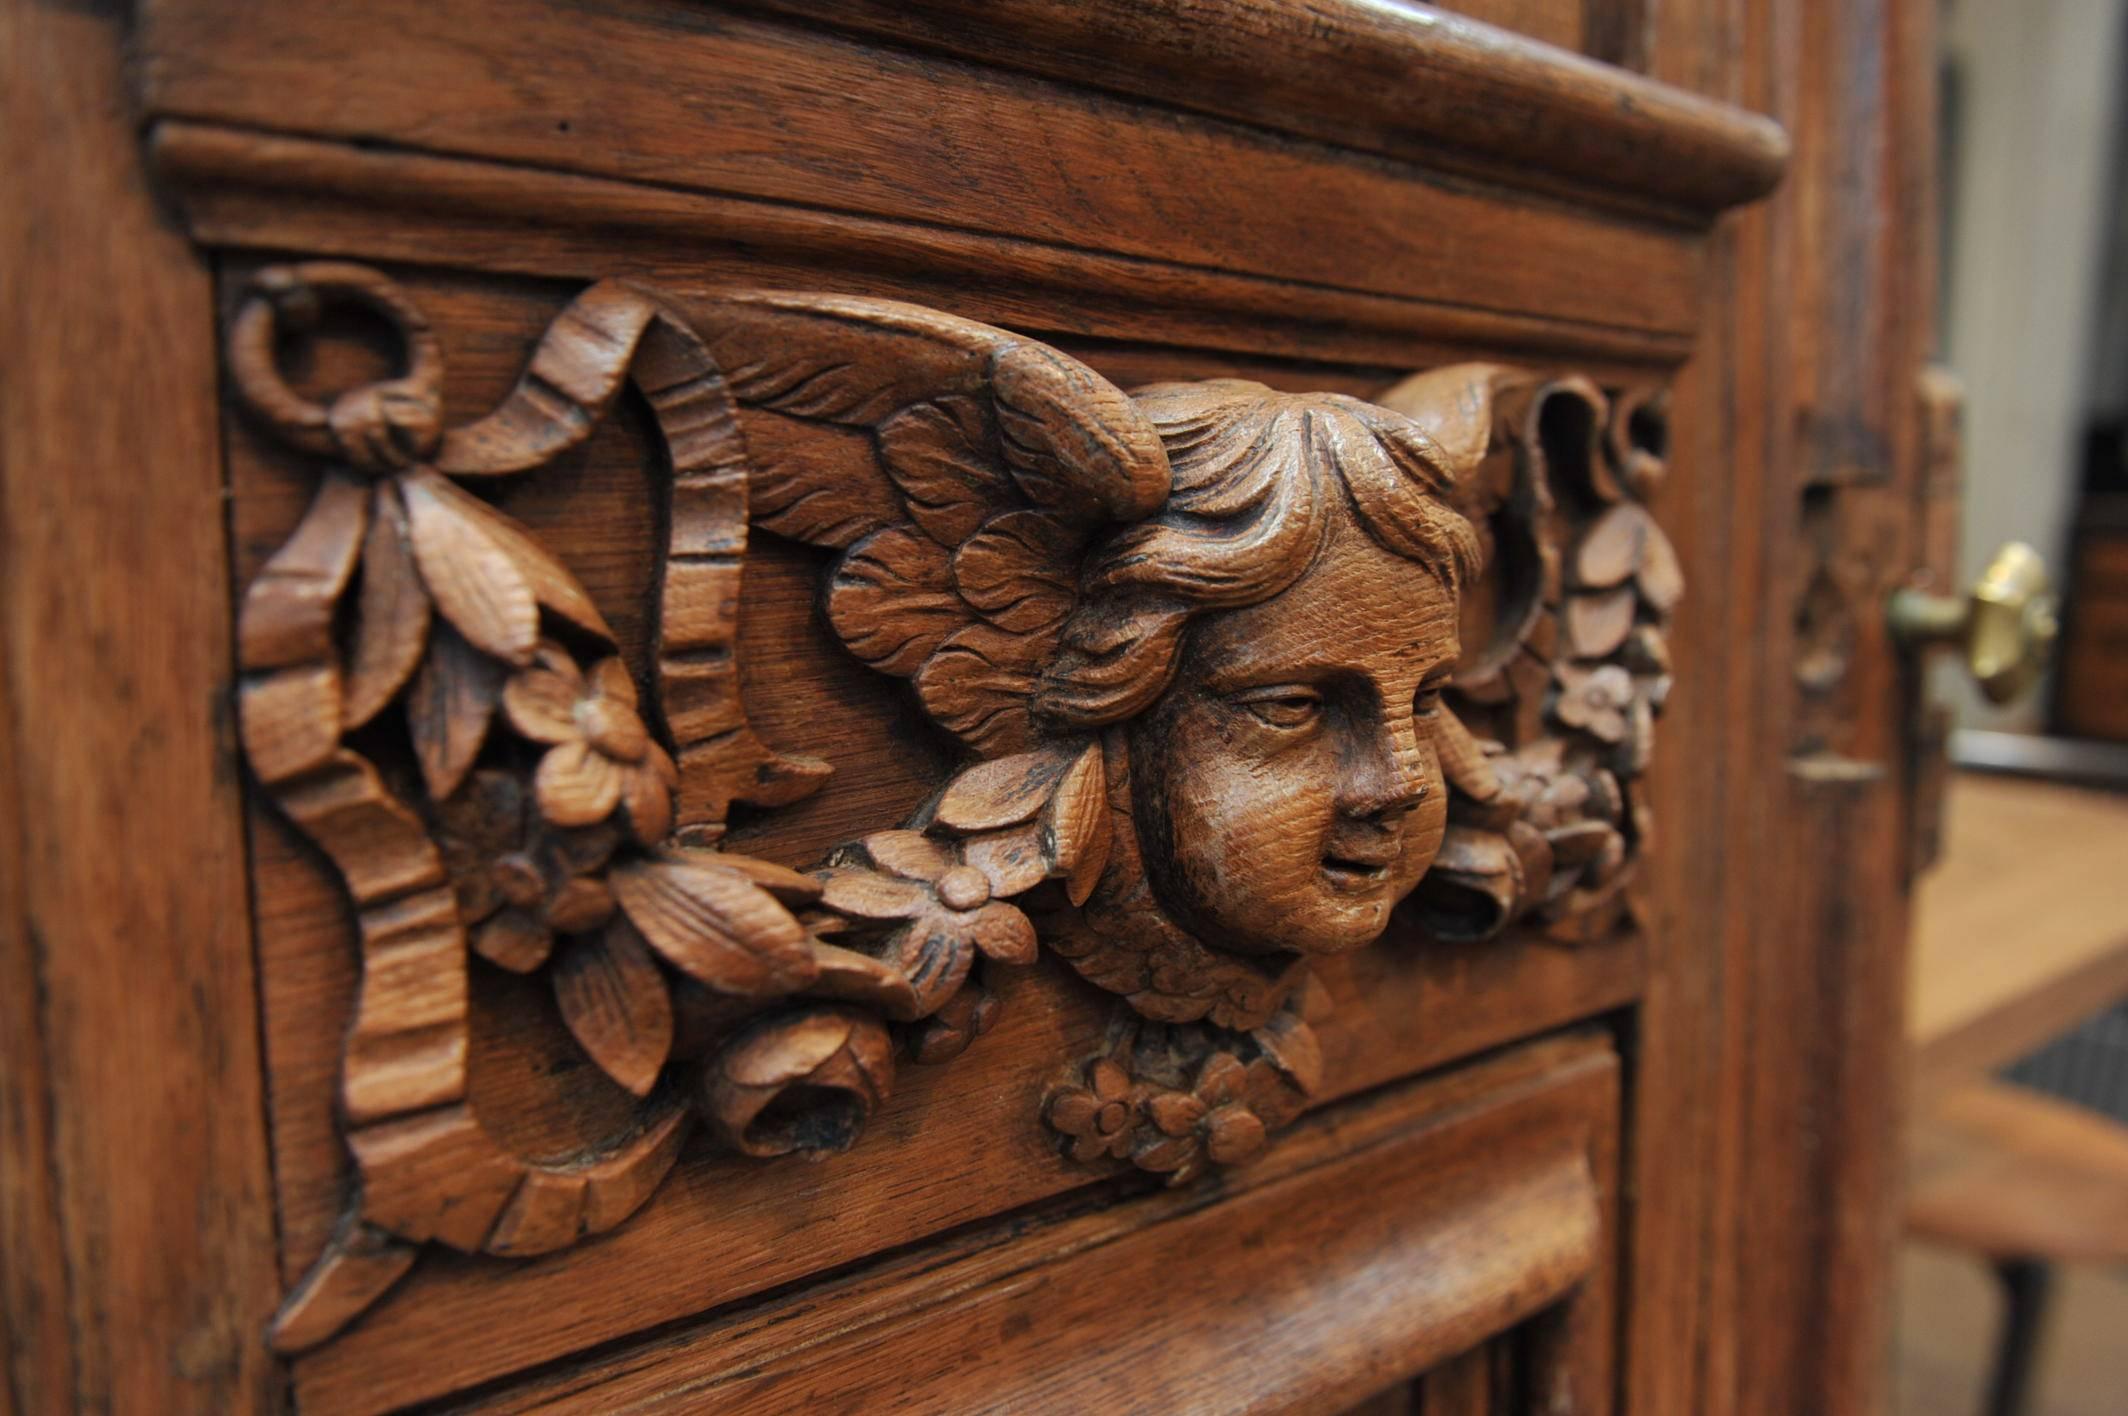 Antique French entrance or inside Renaissance door great carved oak with cherubs and columns. Curtains carving on back side, circa 1750.